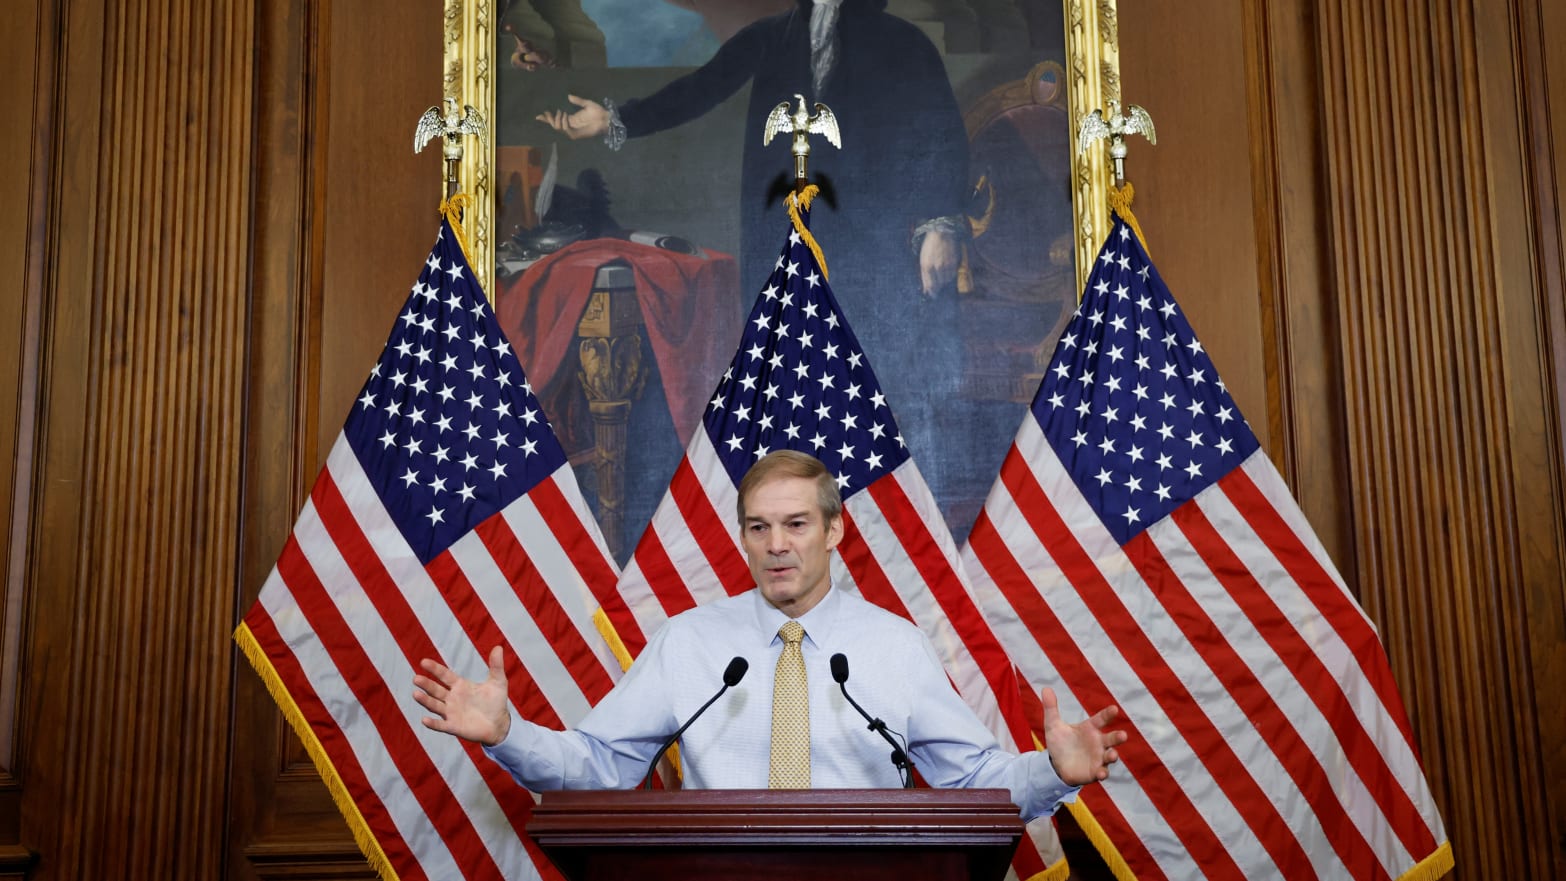 Jim Jordan speaks during an early morning press conference about his continuing bid to become the next Speaker of the House of Representatives at the U.S. Capitol in Washington, U.S., October 20, 2023.